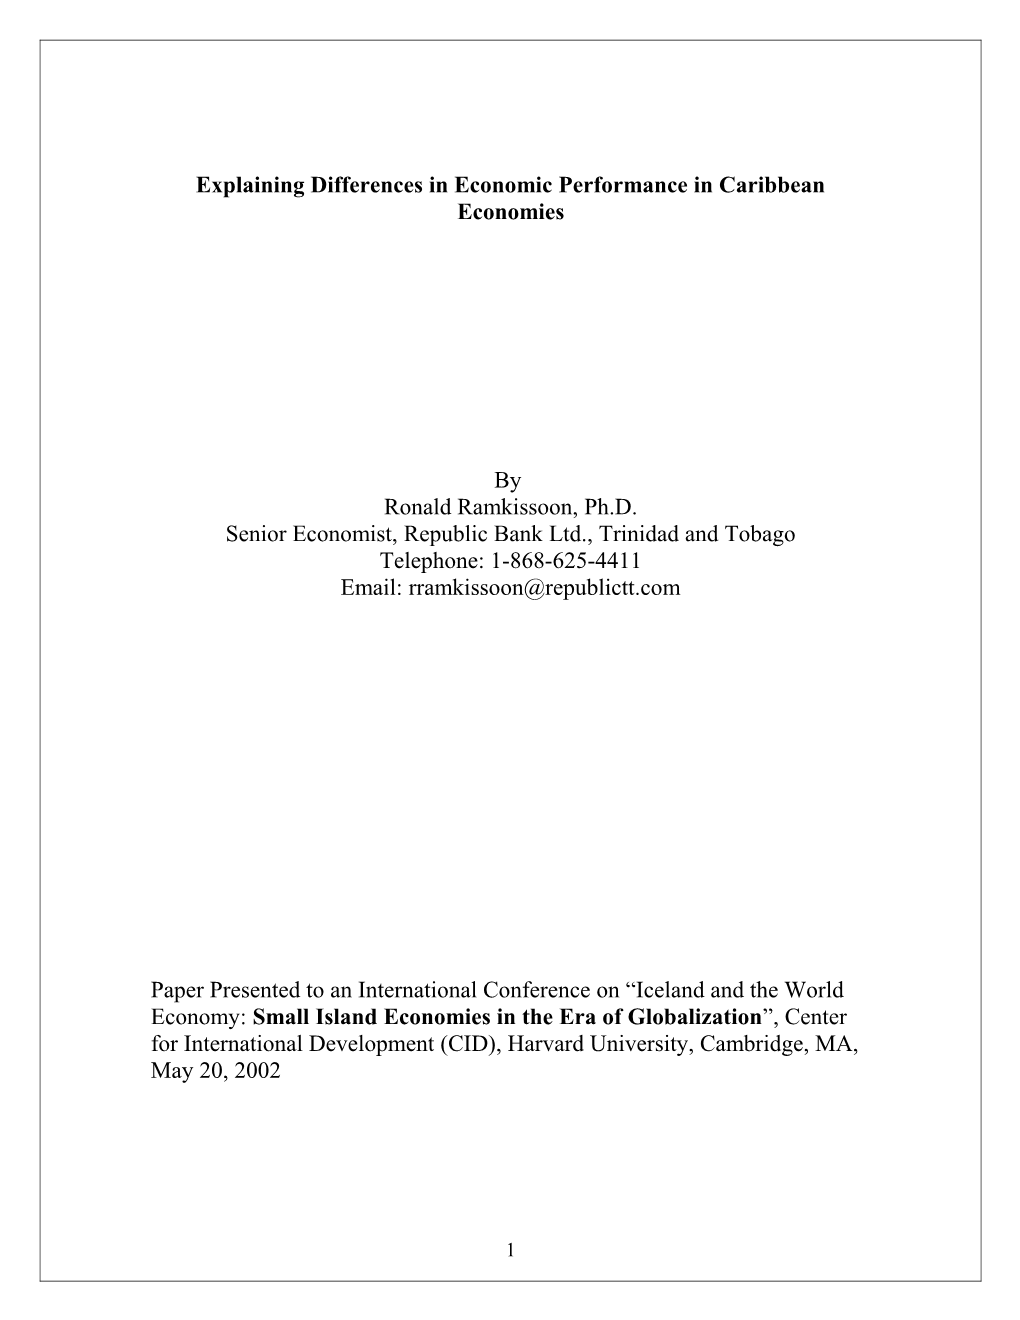 Explaining Differences in Economic Performance in the Caribbean Island Economies